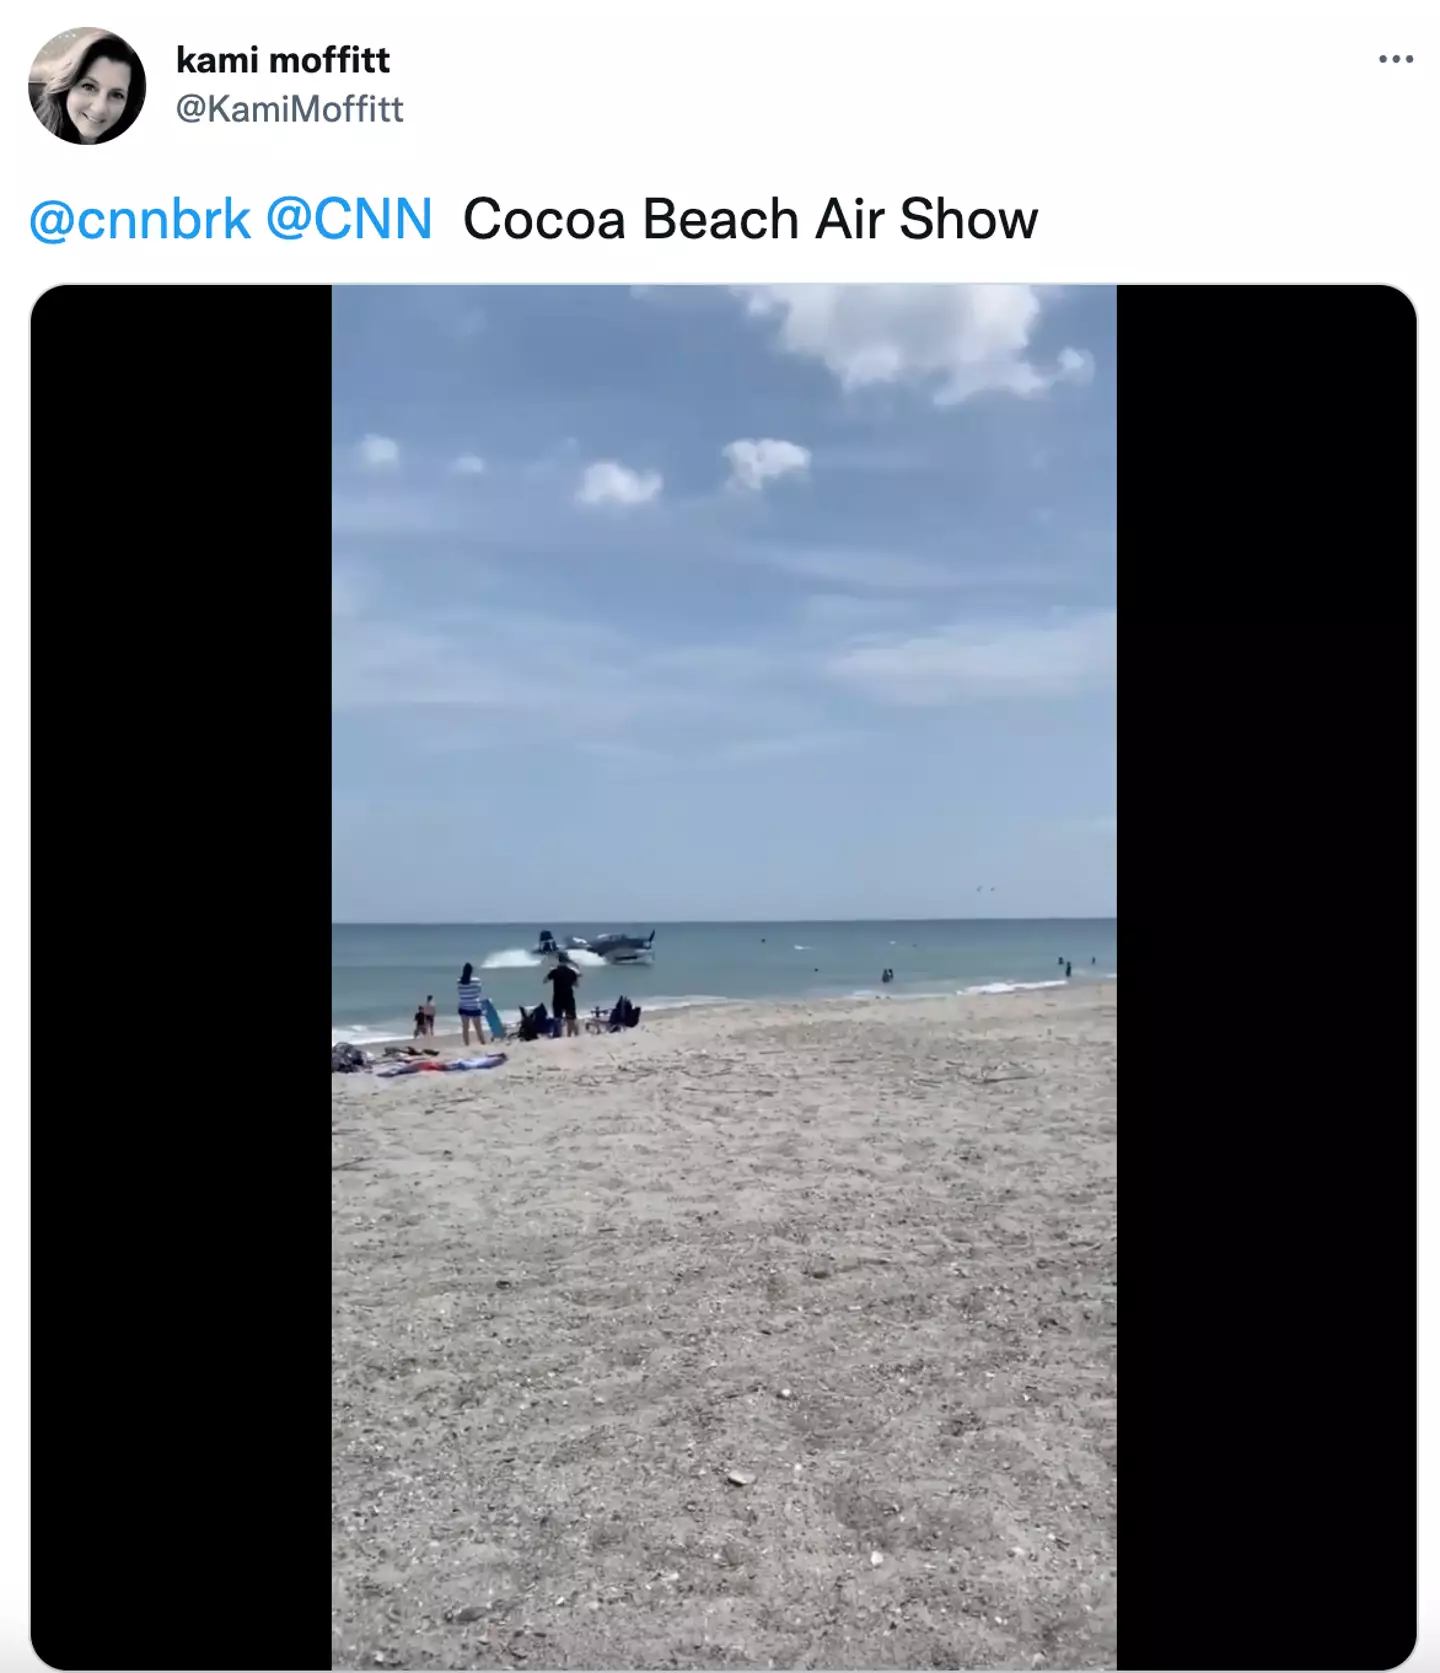 Another video posted on Twitter showed the incident from another angle.